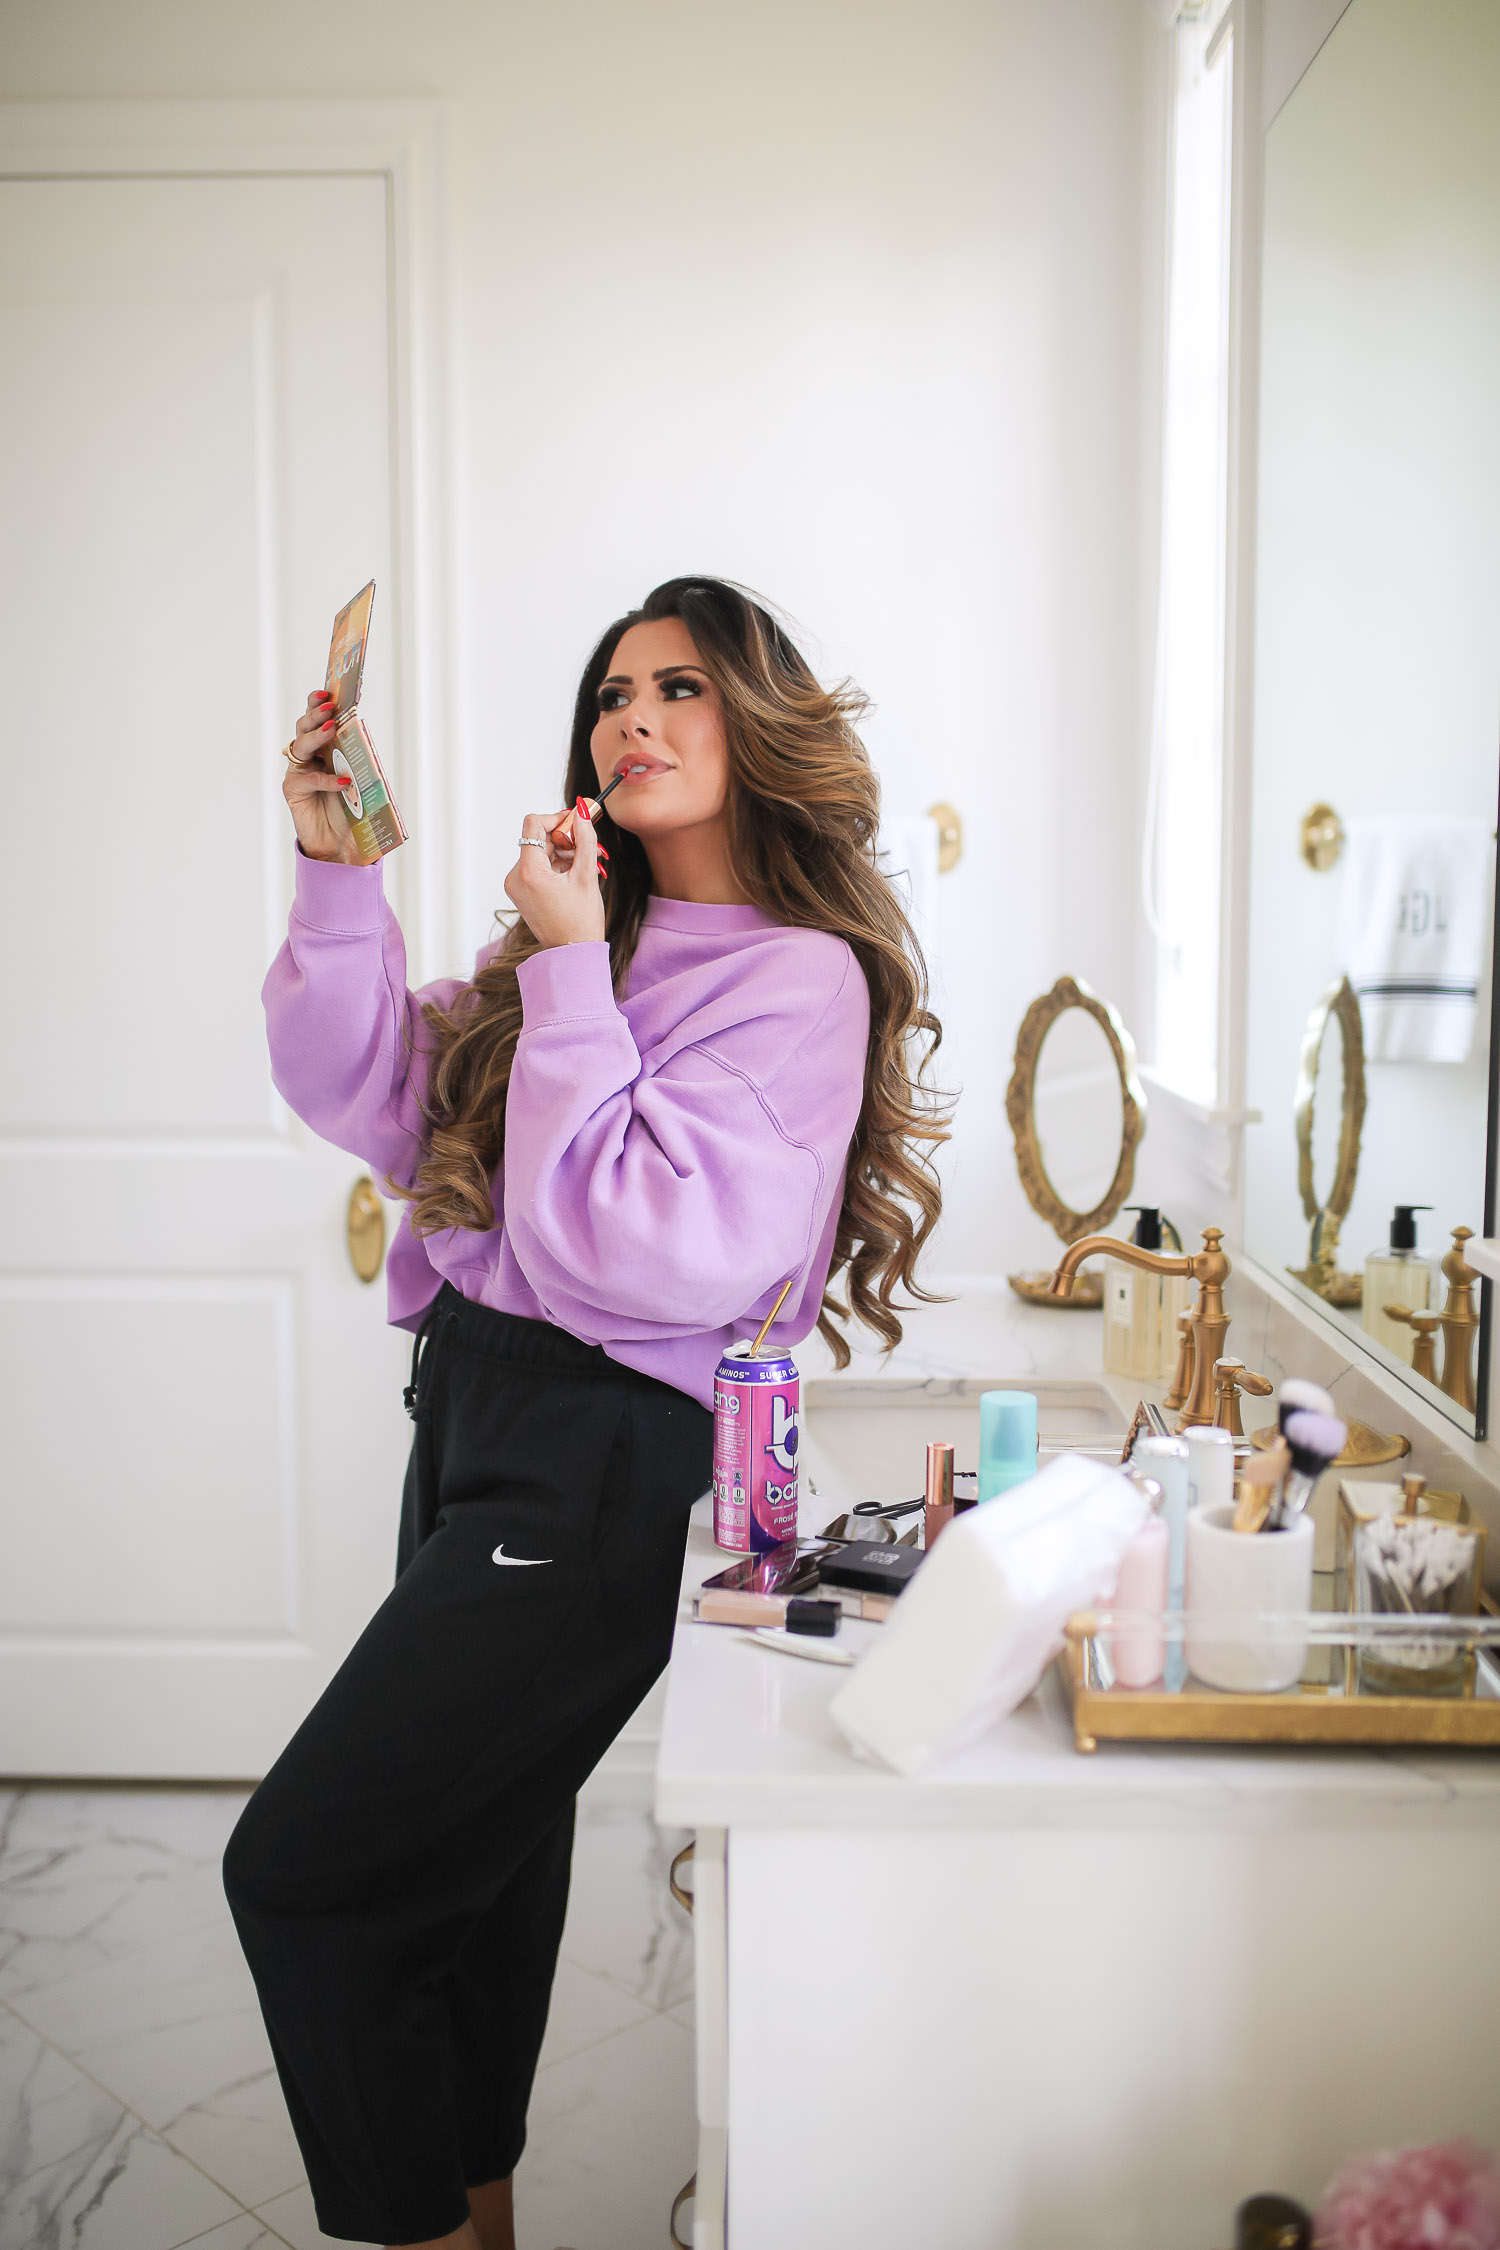 nordstrom beauty must haves fall 2021, sisley pore minimizer review, sisley blur powder review, sisley hyaluronic acid, emily gemma beauty must haves, hoola bronzer palette | Beauty Favorites by popular US beauty blog, The Sweetest Thing: image of Emily Gemma wearing a purple sweatshirt and black Nike jogger pants while leaning against her bathroom vanity and applying lipgloss while she looks in a handheld mirror. 